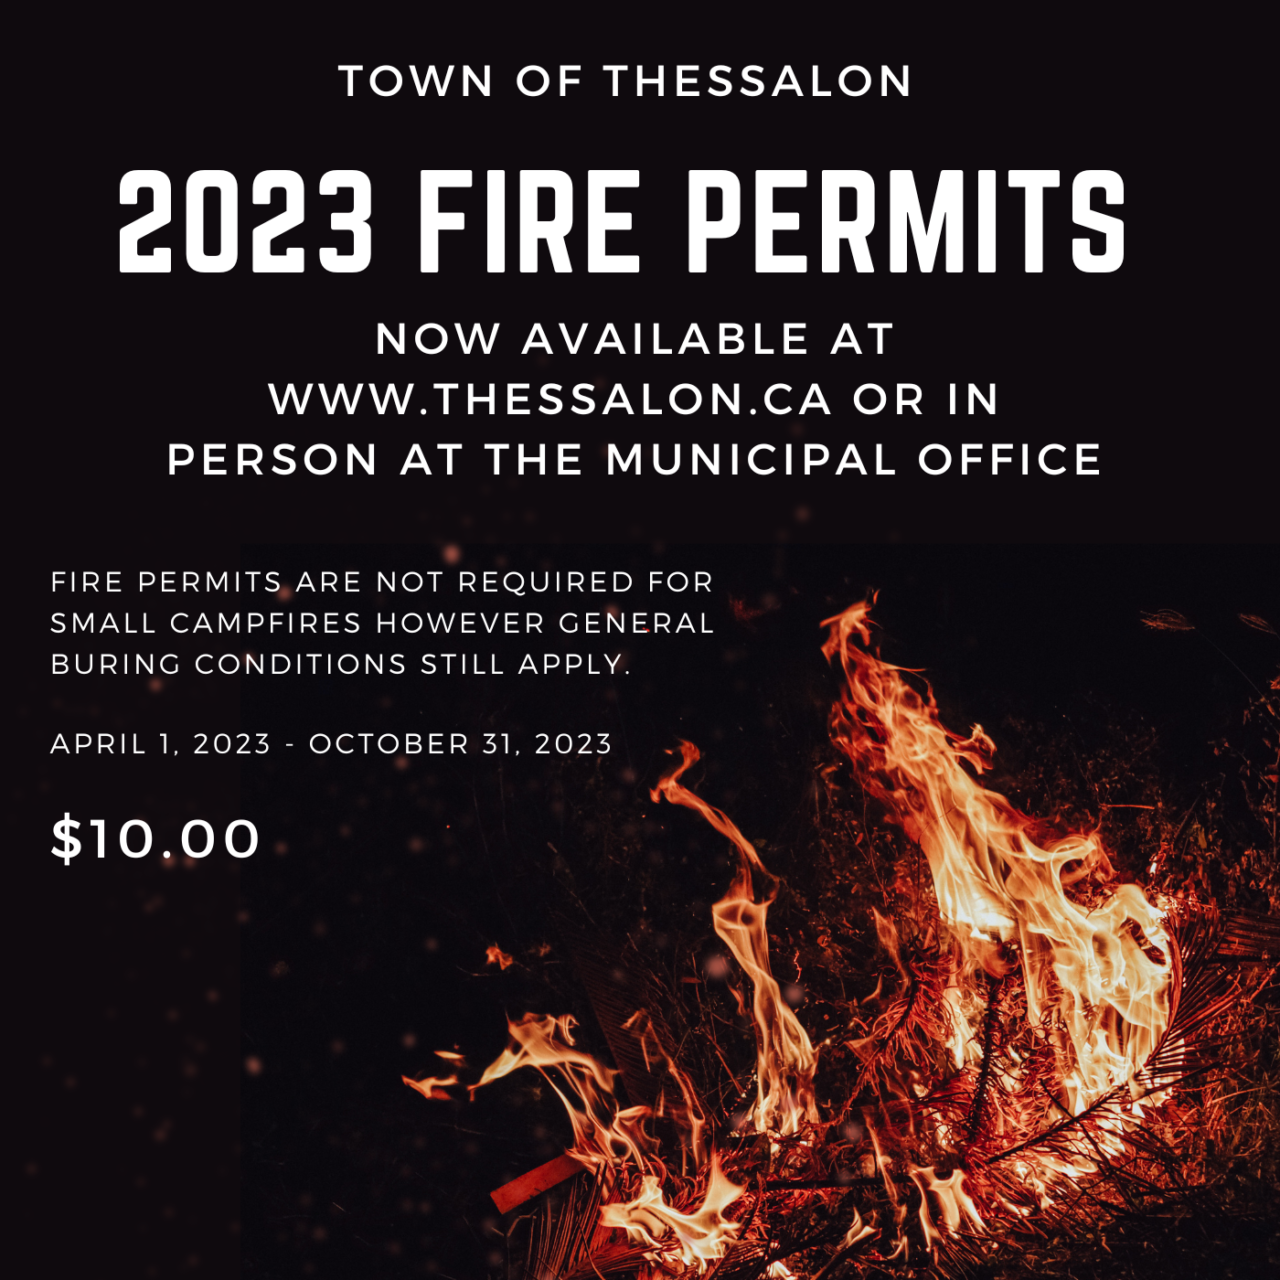 2023 Fire Permits no available. 